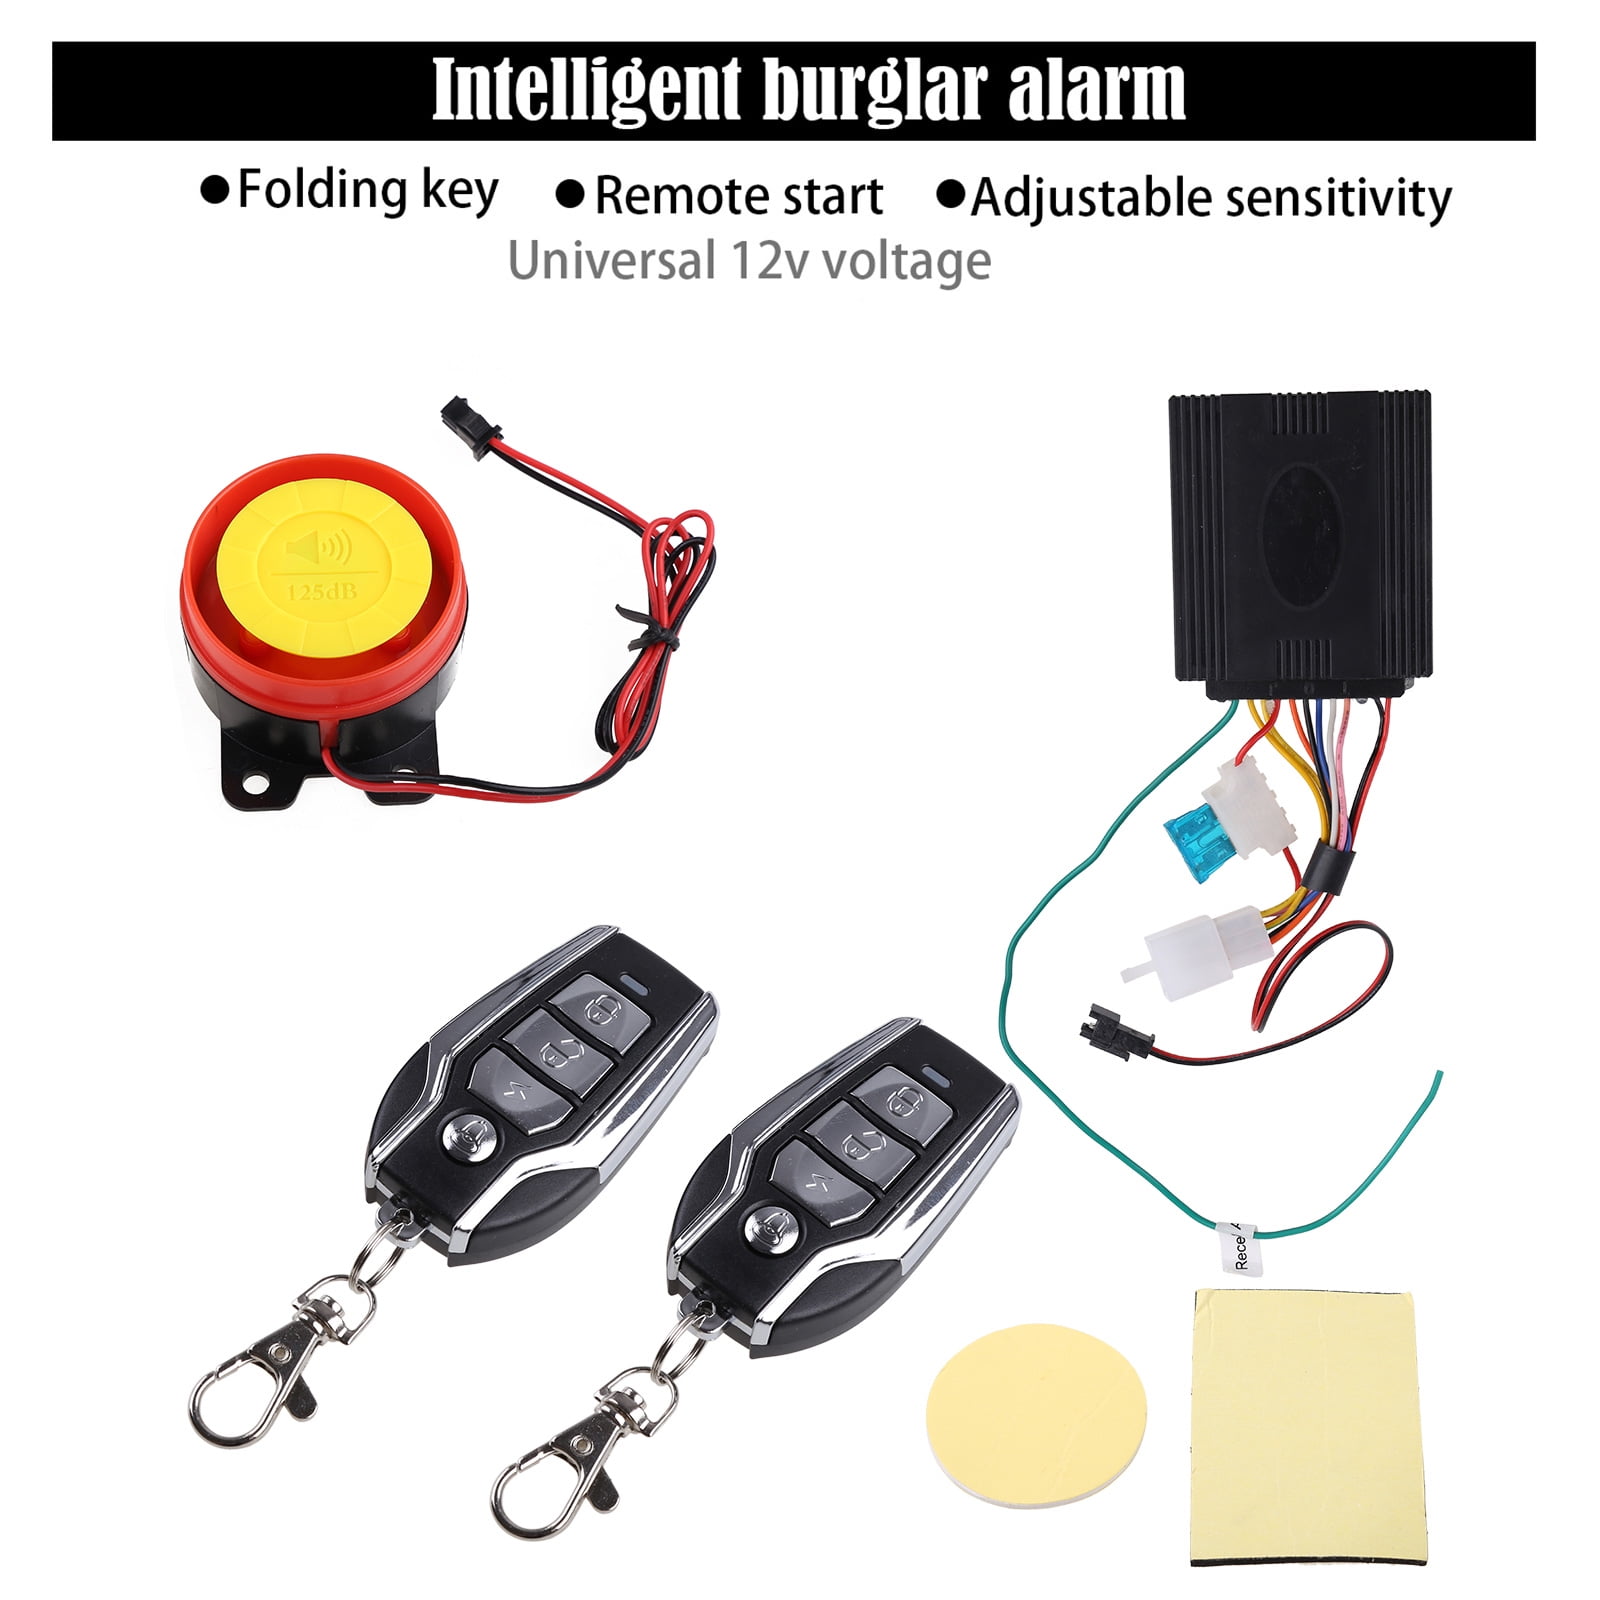 burst Hjemland Forhøre Sofullue Motorcycle Anti-theft Universal Motorcycle Scooter Security Alarm  System Engine Start Remote Control for Key - Walmart.com